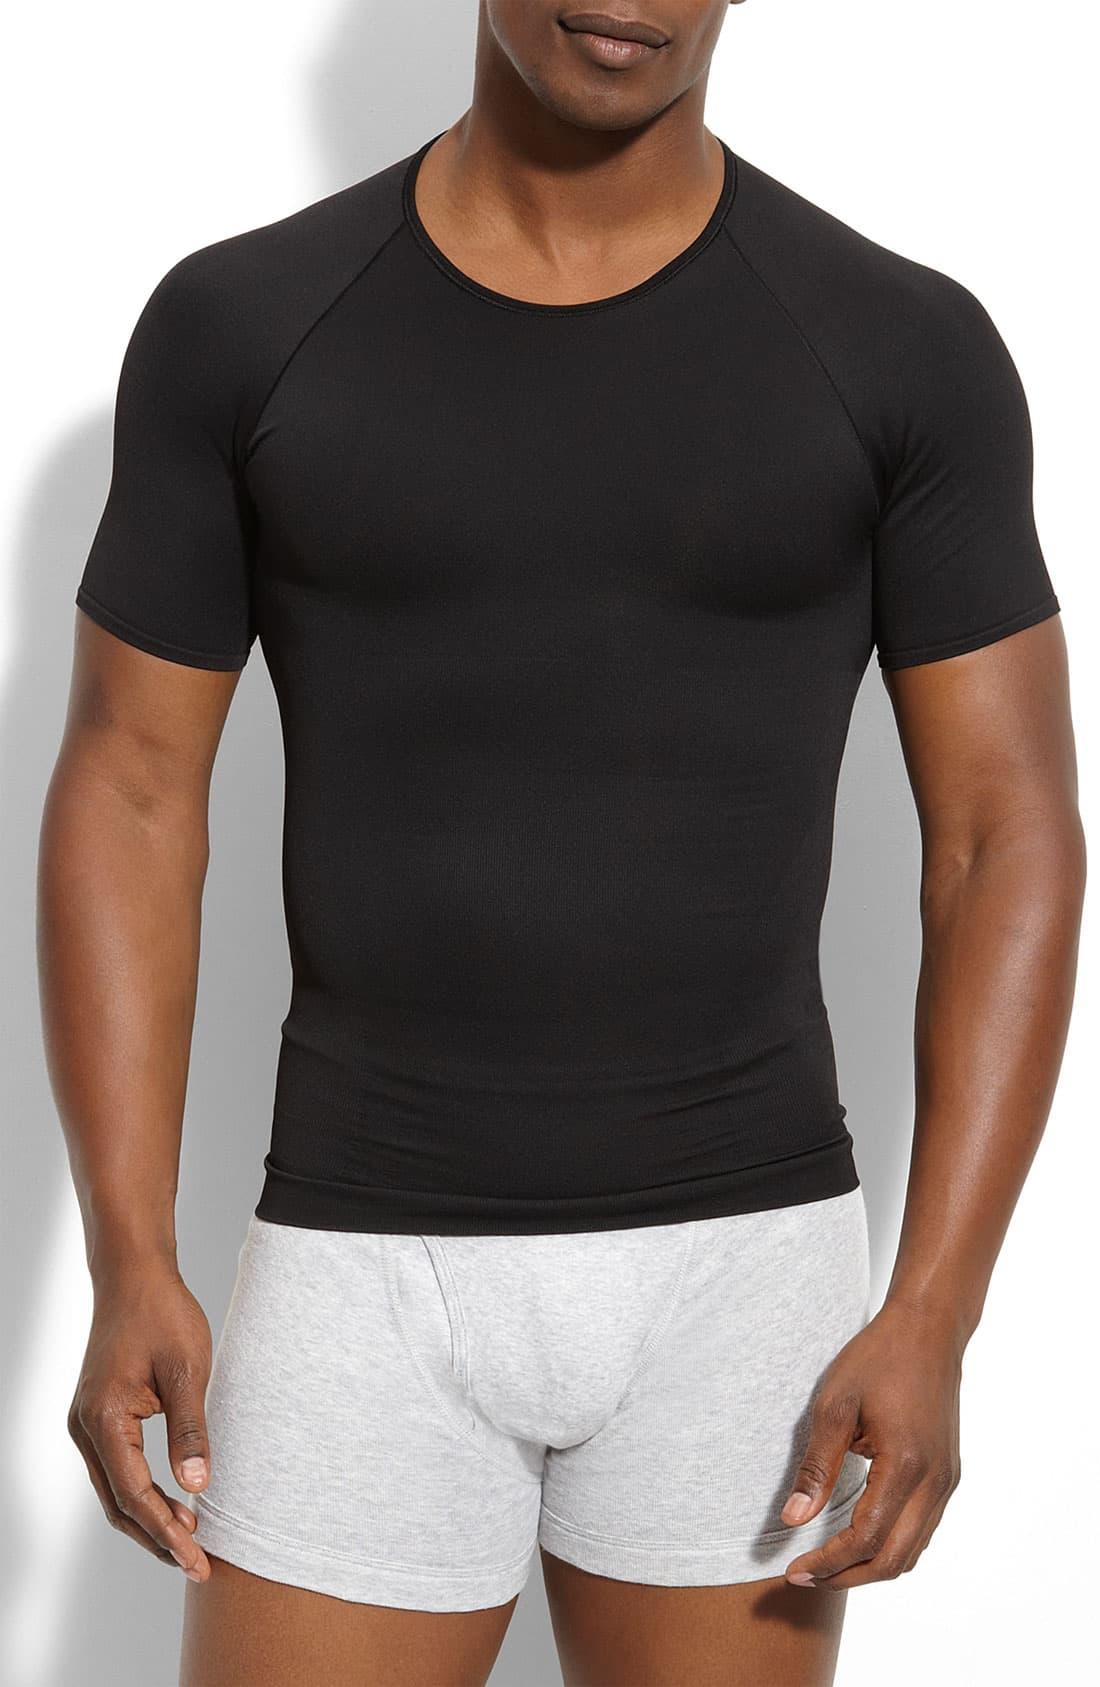 Spanx Spanx Zoned Performance Crewneck T-shirt in Black for Men - Lyst